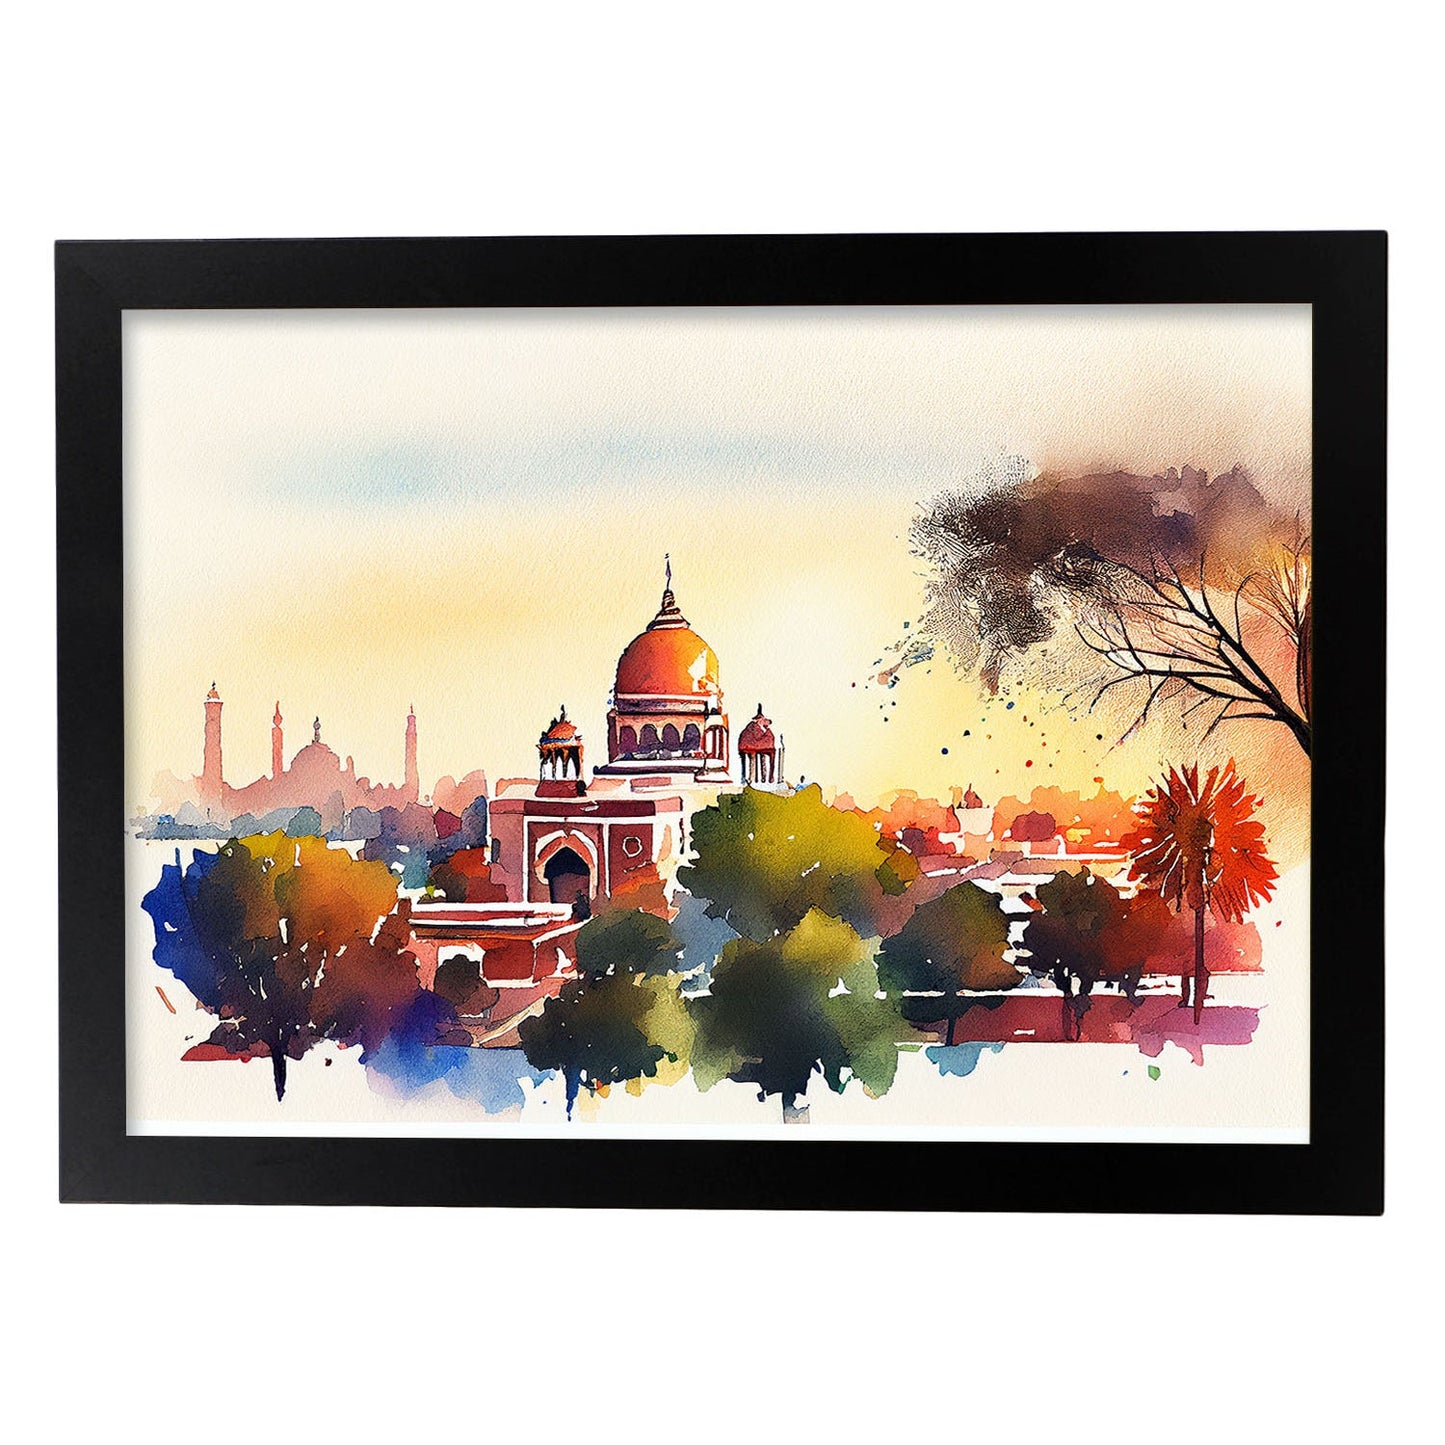 Nacnic watercolor of a skyline of the city of New Delhi. Aesthetic Wall Art Prints for Bedroom or Living Room Design.